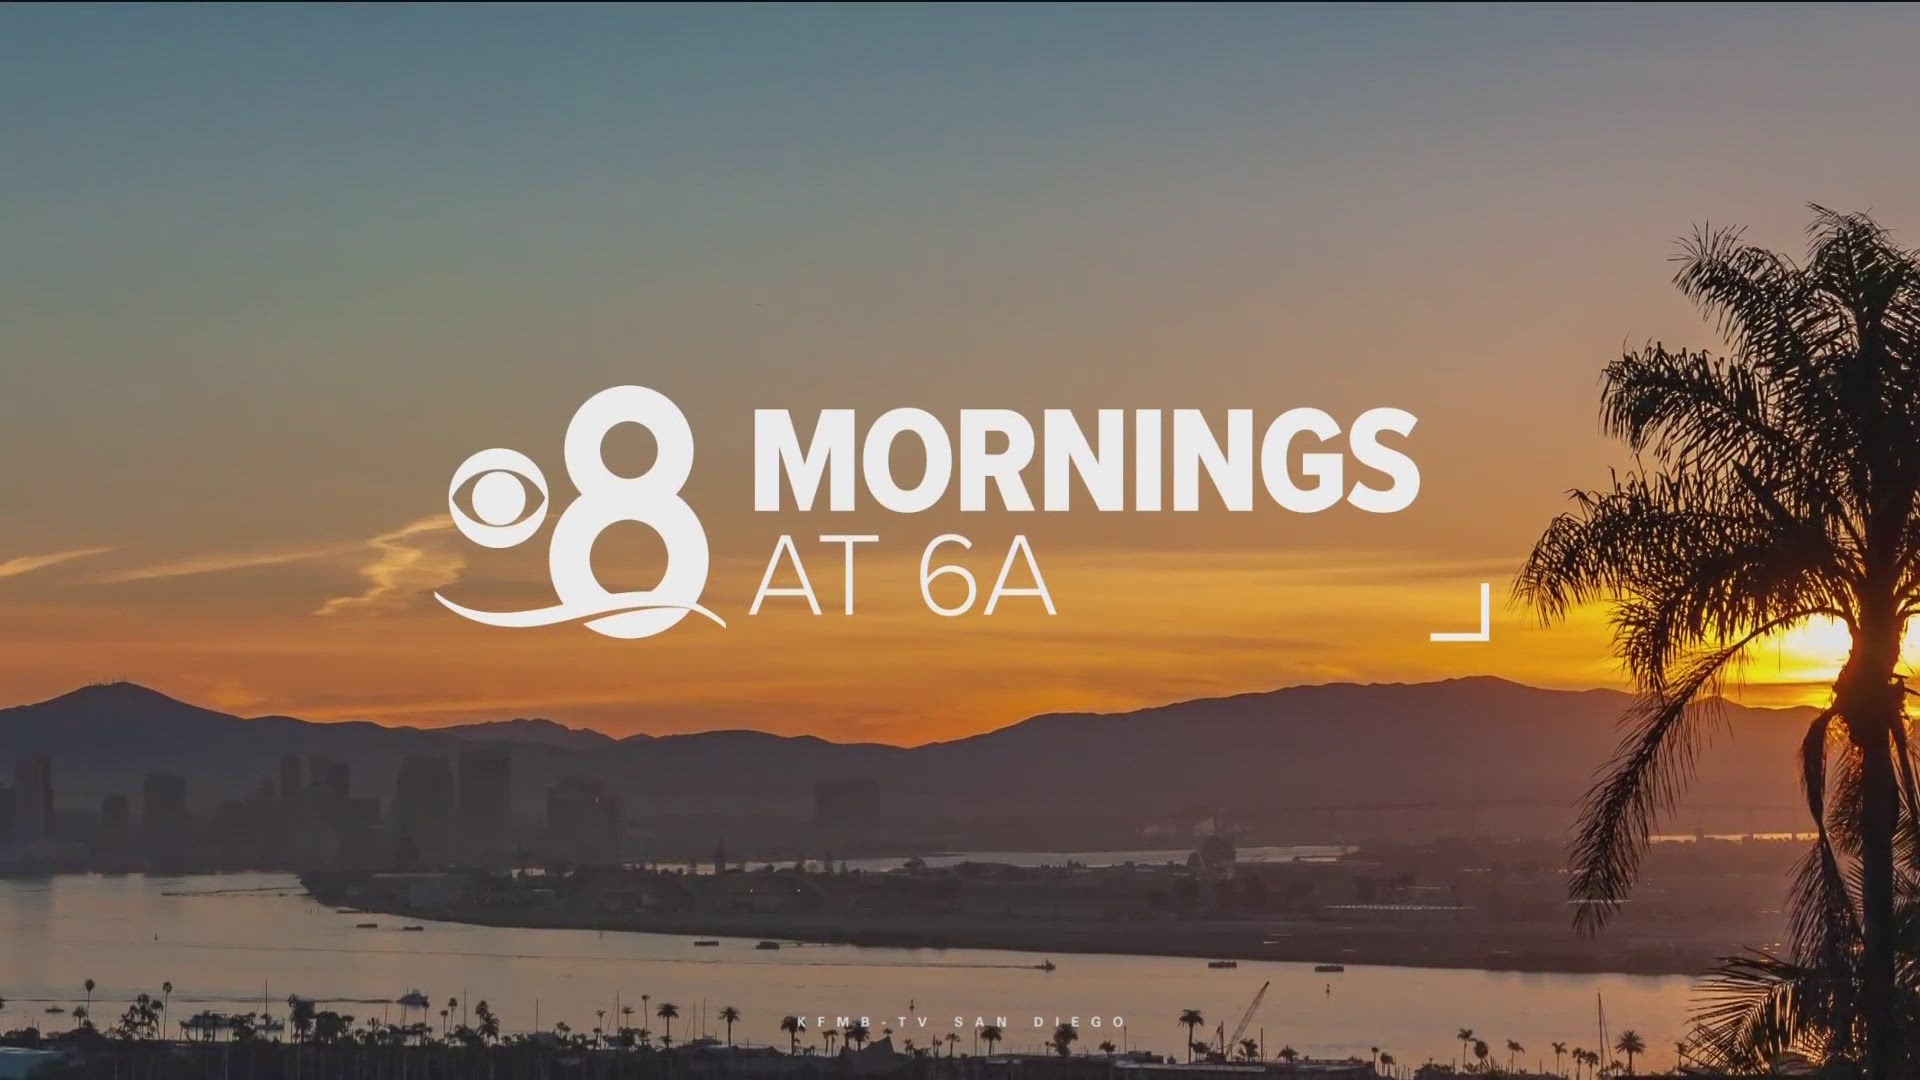 Here are the top stories around San Diego County for the morning of Tuesday, August 6th.
For the latest news, weather and sports, head to:
https://www.cbs8.com/